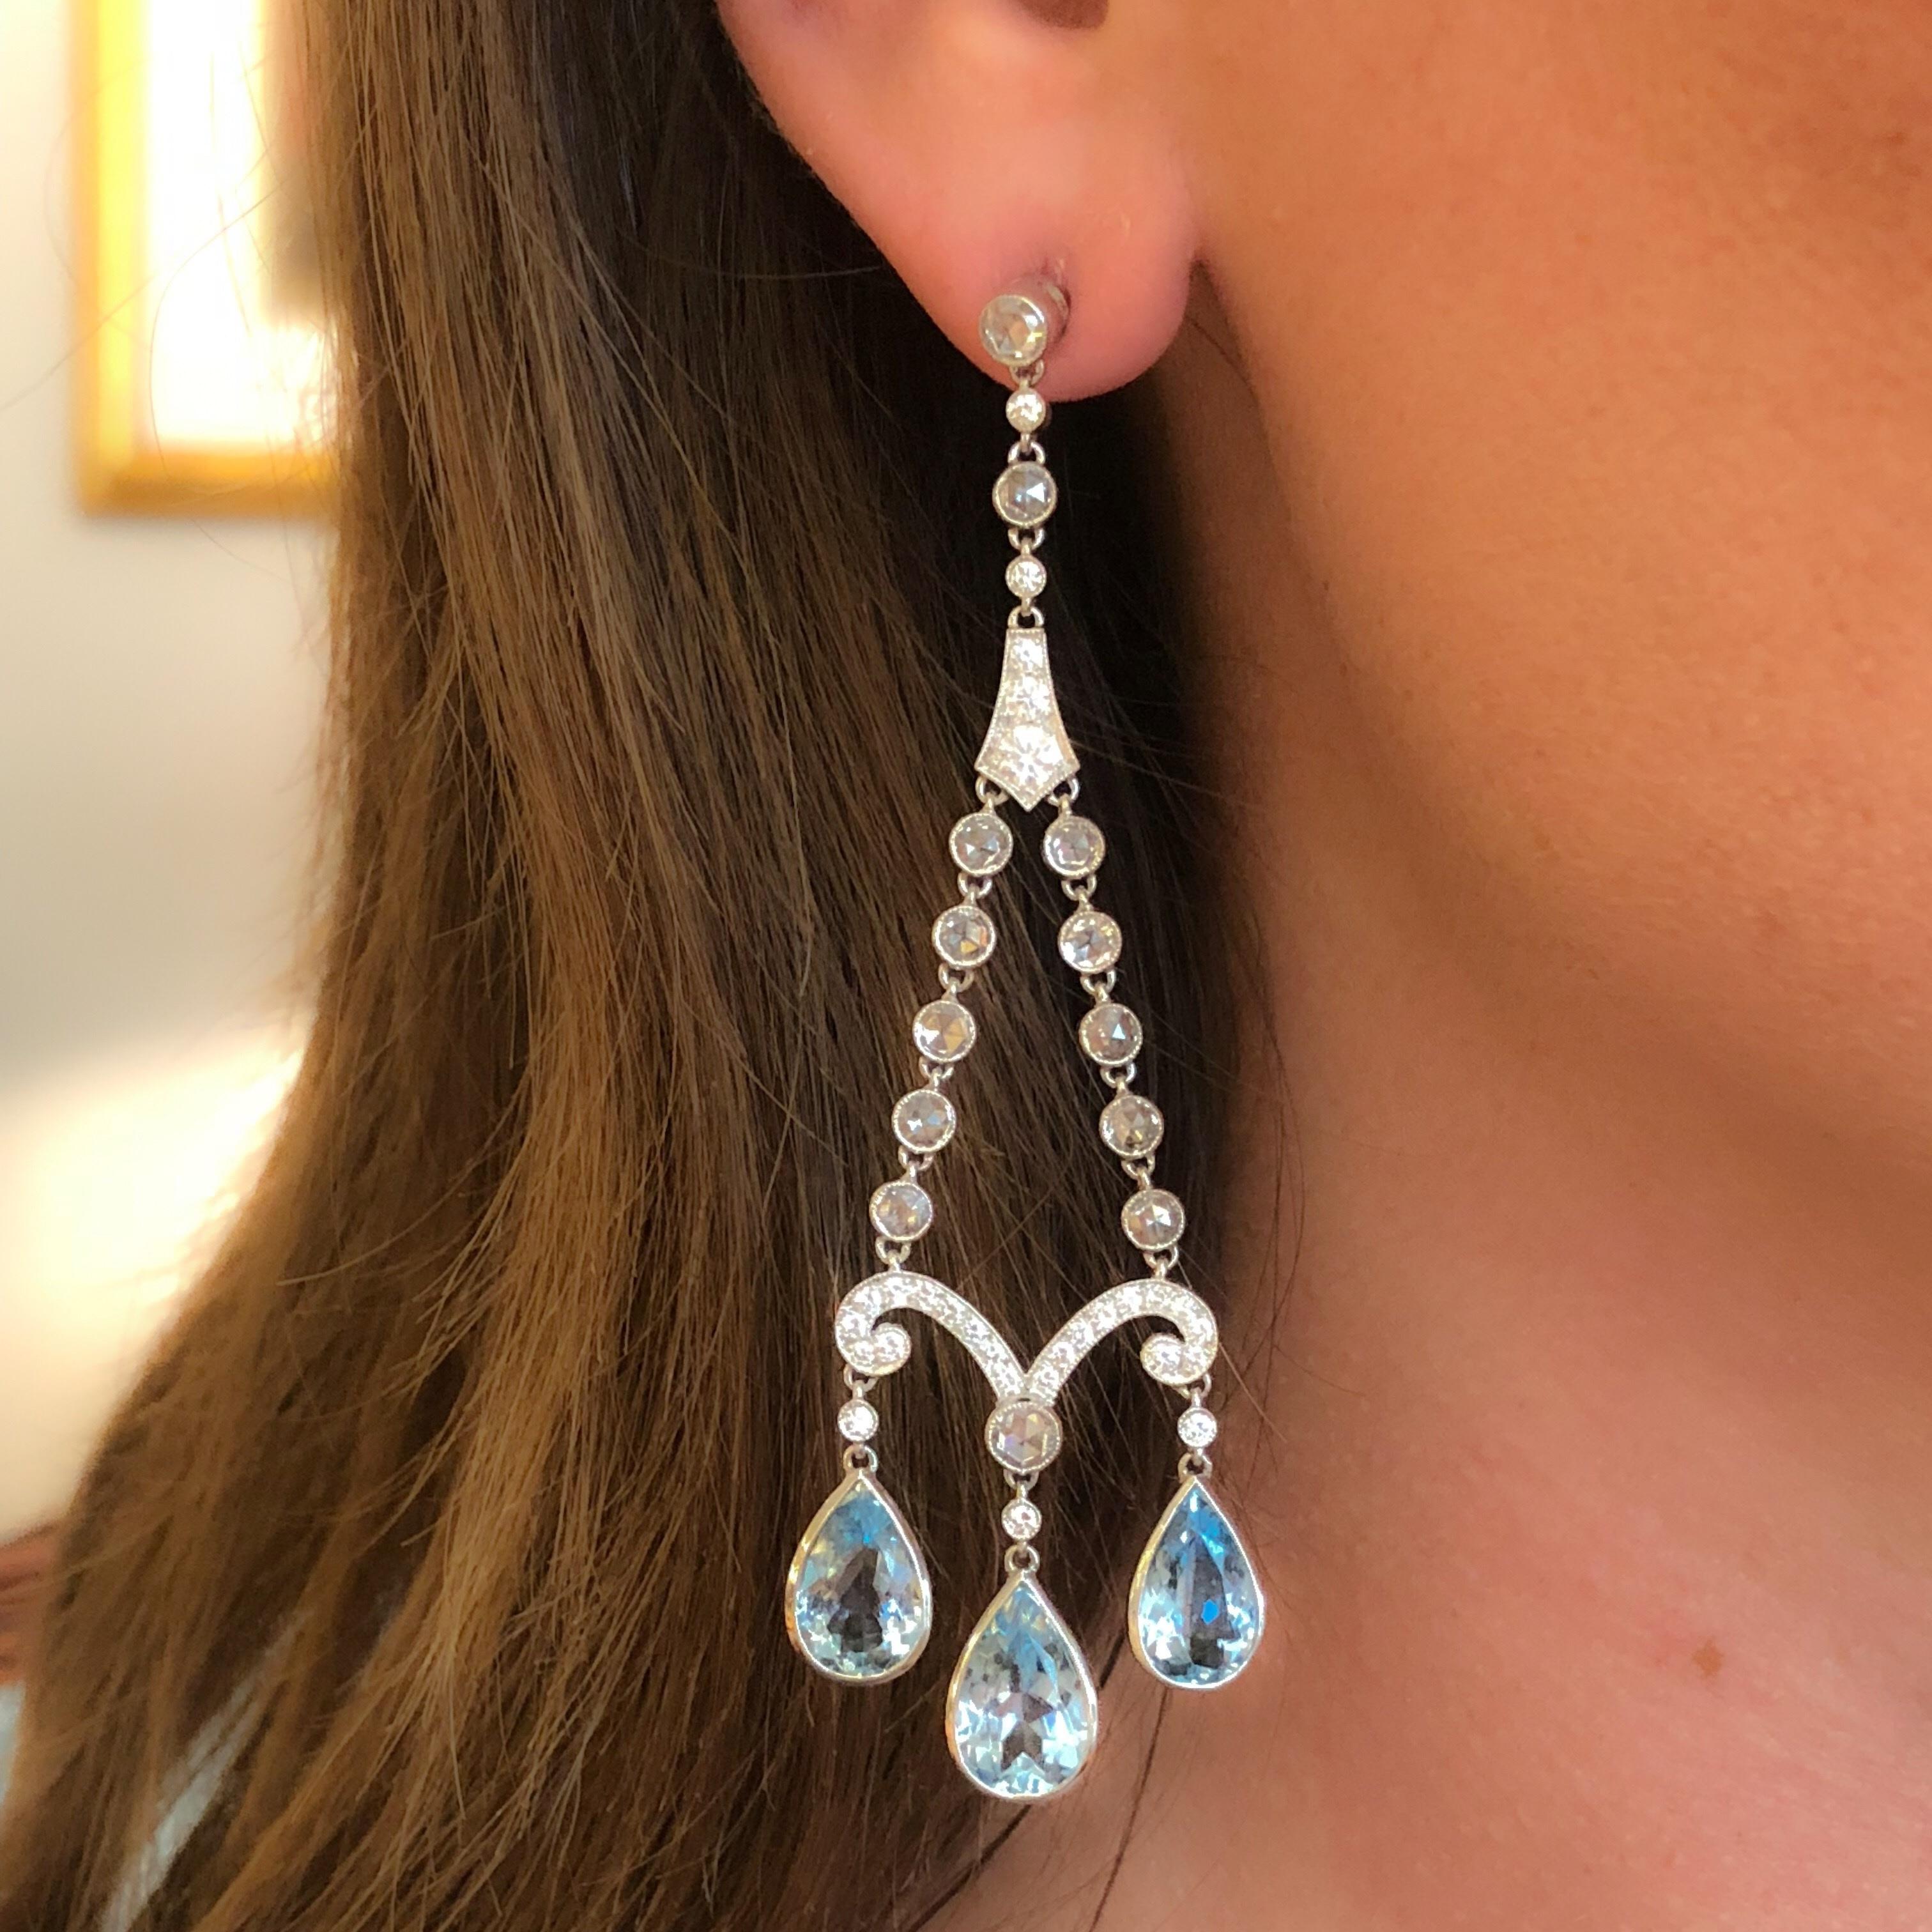 A pair of earrings with aquamarines and diamonds by Tiffany & Co. The earrings have 6 pear-shaped aquamarines with an approximate total weight of 10.00 carats, and 82 round and rose-cut diamonds with an approximate total weight of 4.00 carats with